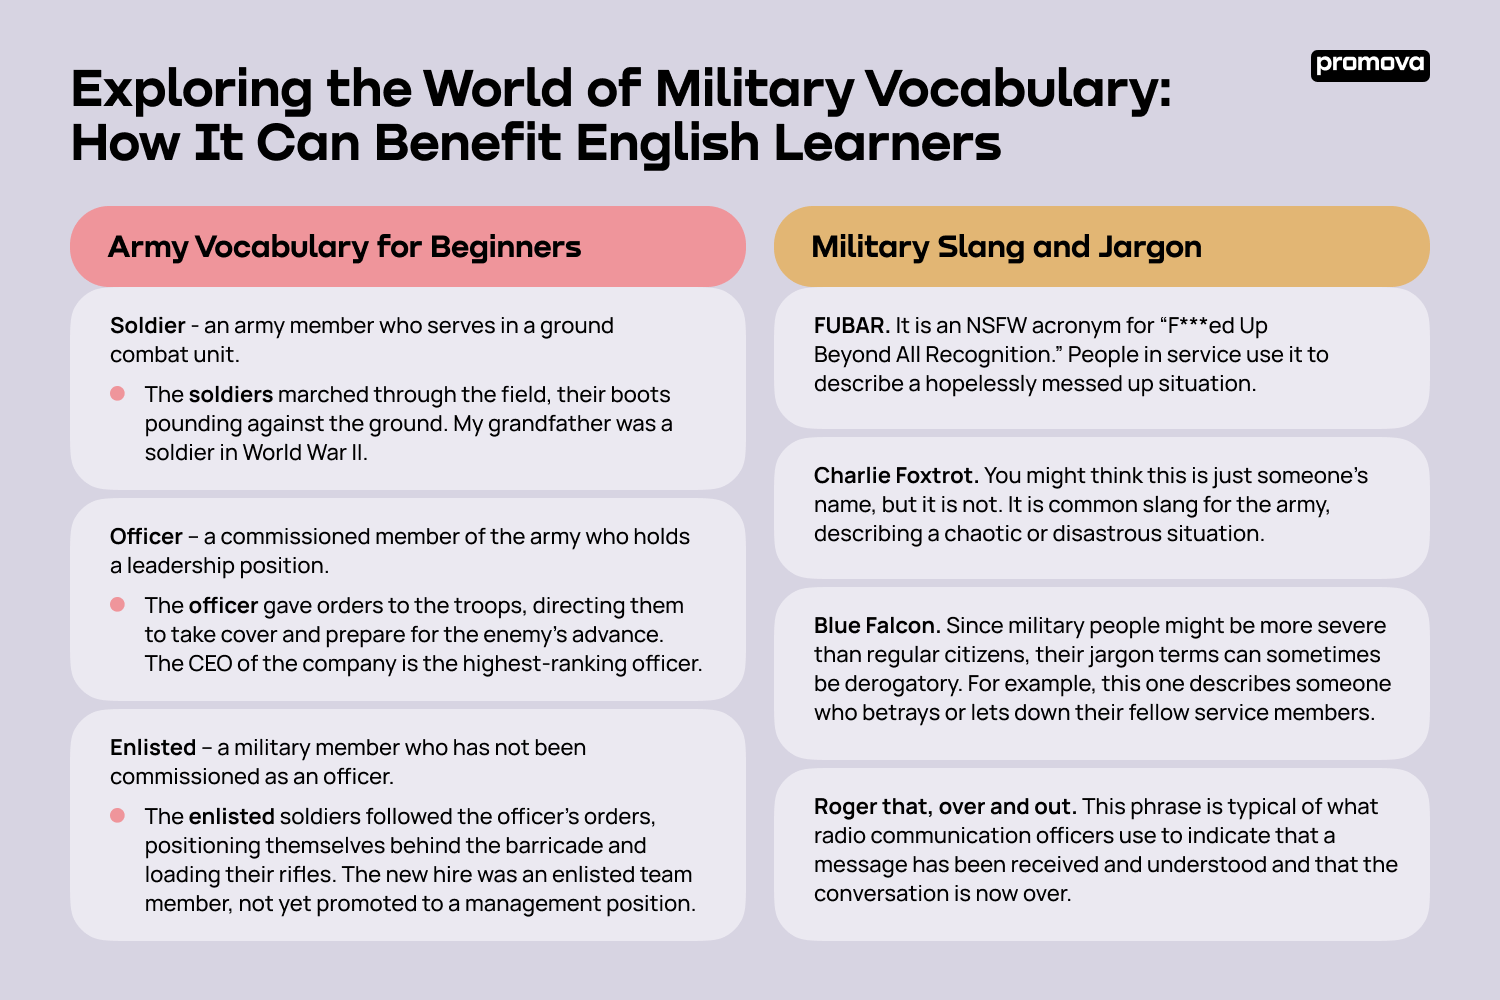 Discover Army Vocabulary And Military Slang